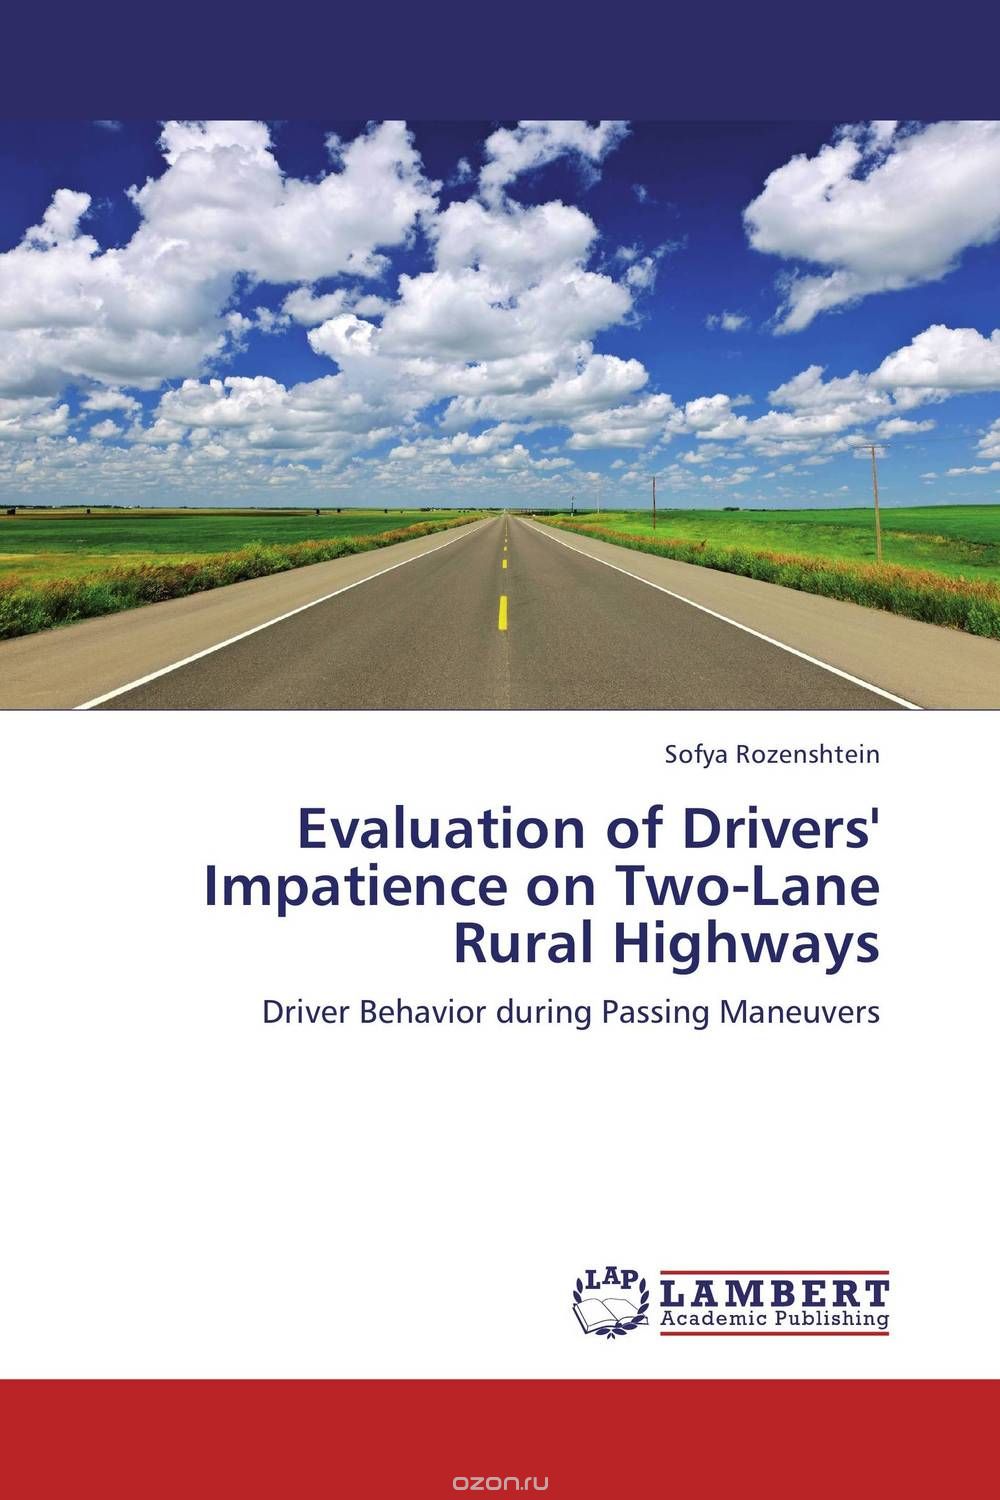 Evaluation of Drivers' Impatience on Two-Lane Rural Highways